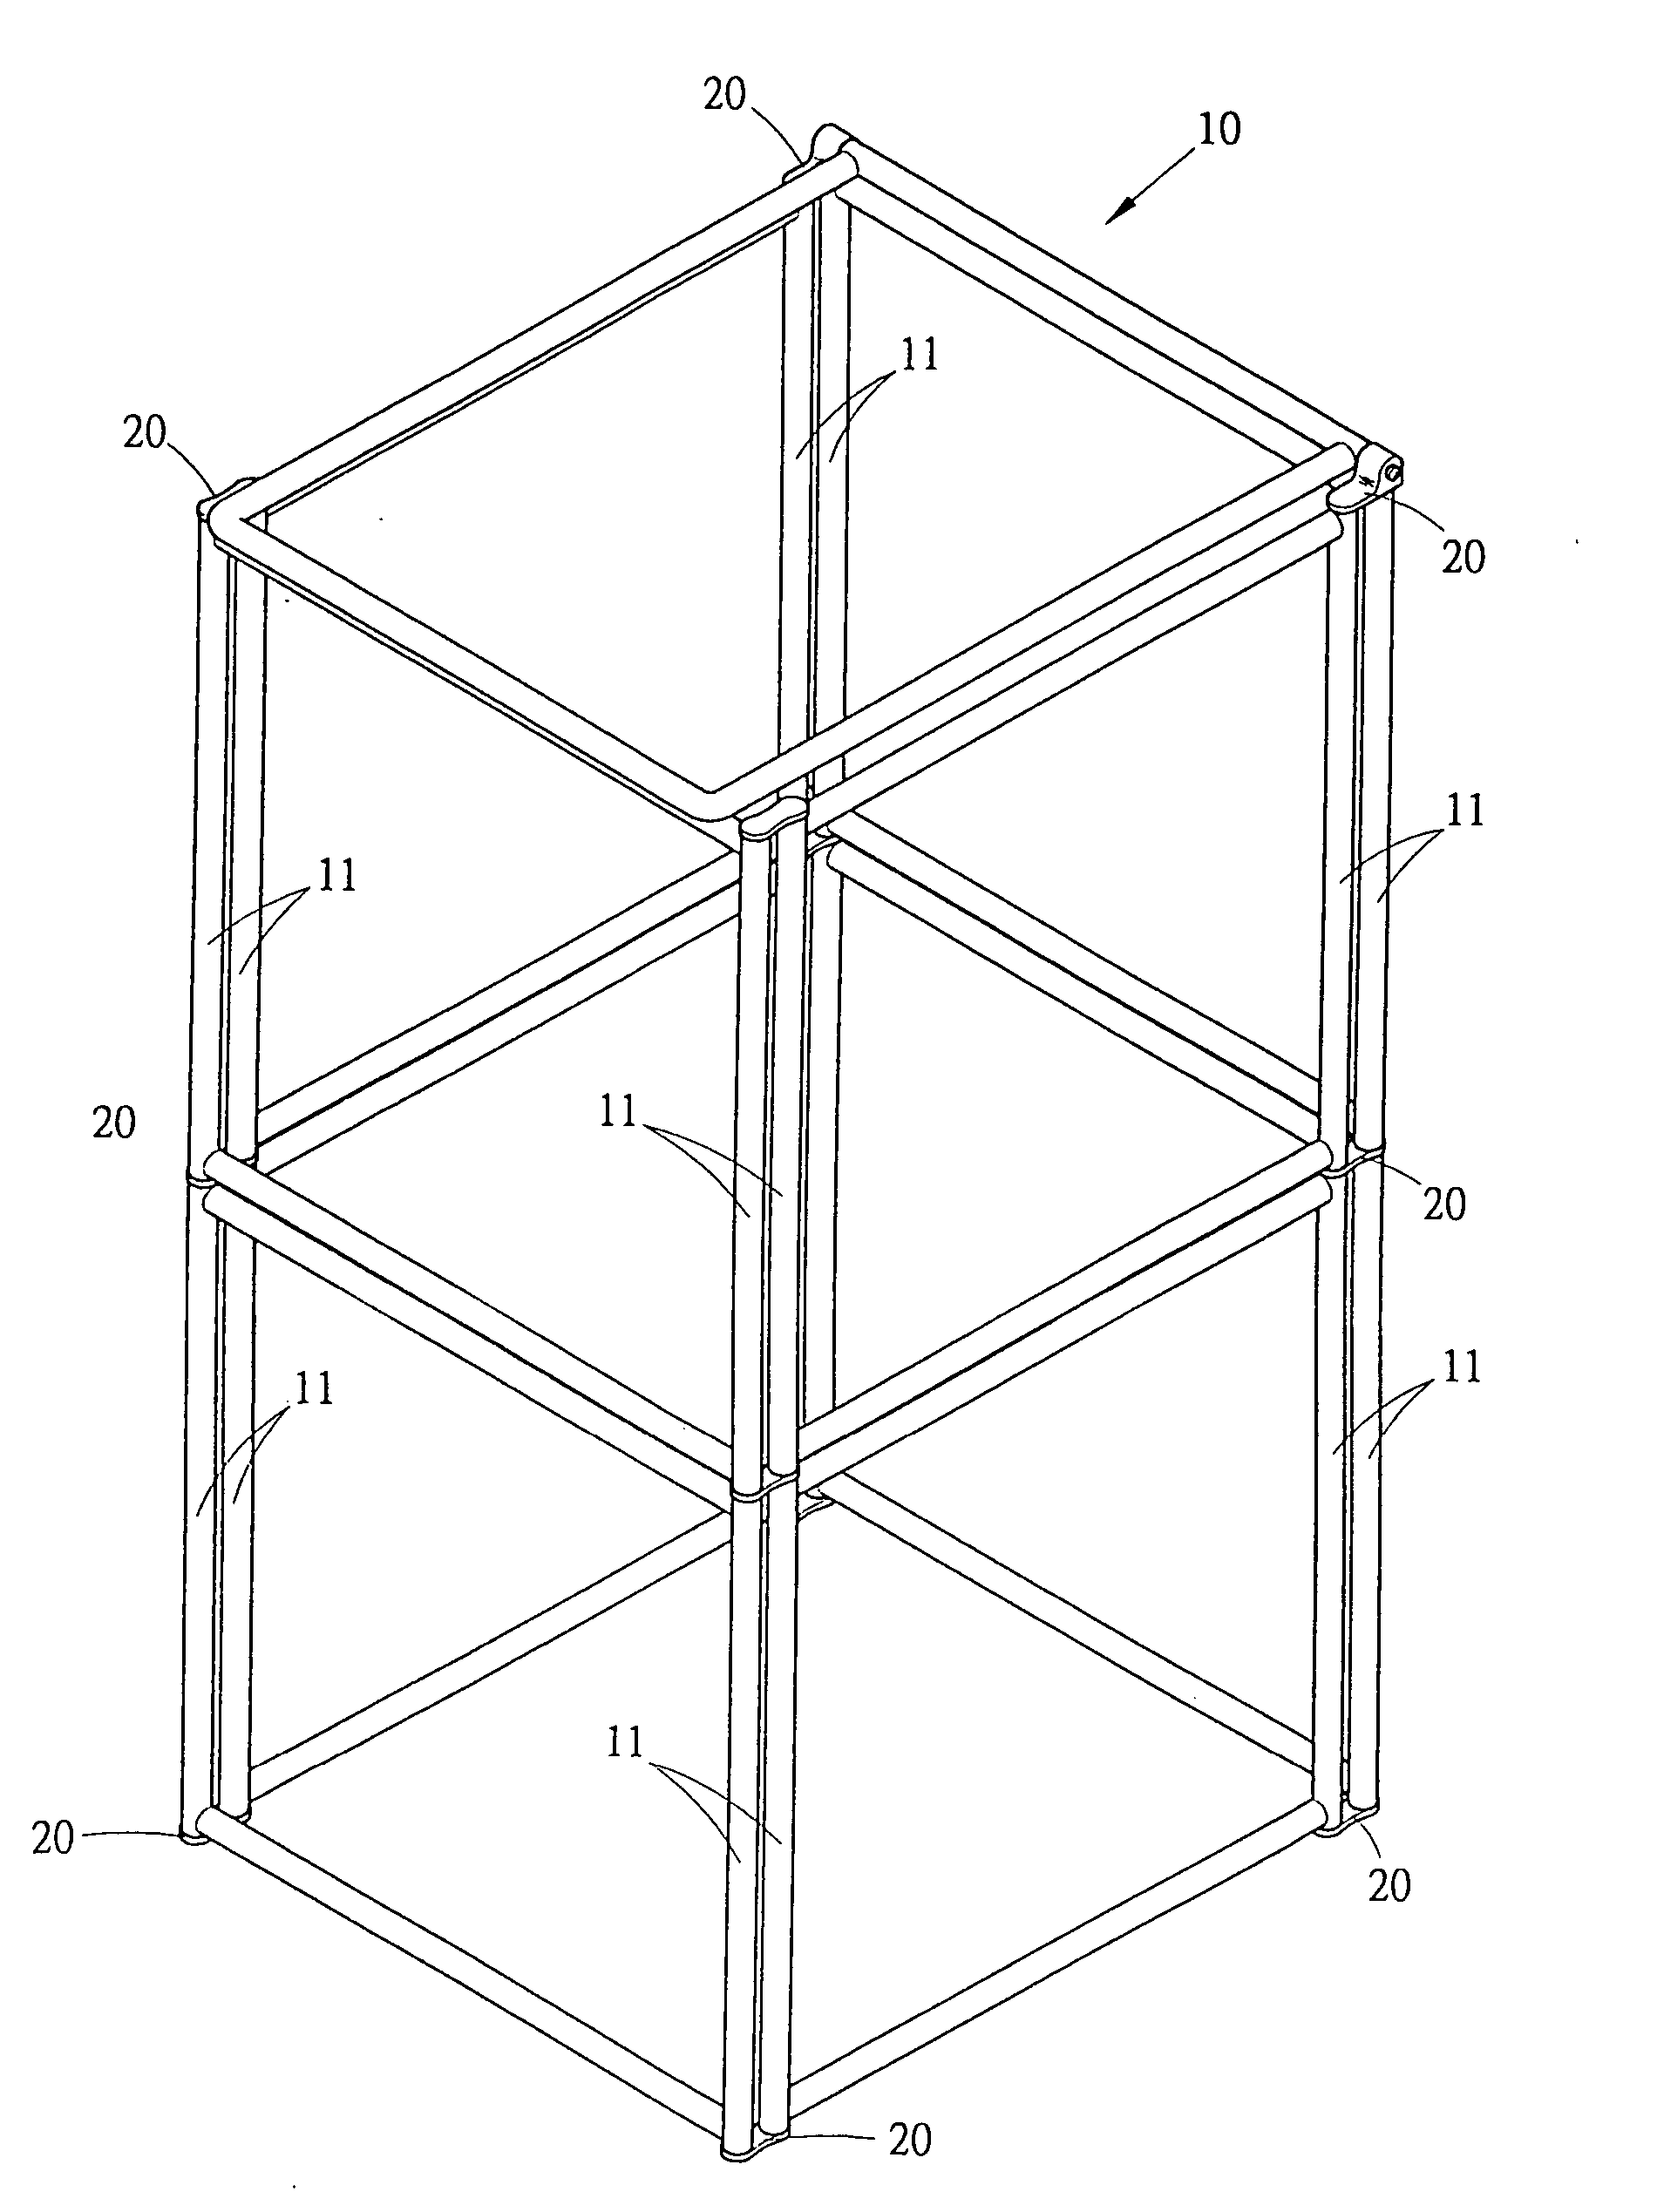 Corner connection block for assembly container